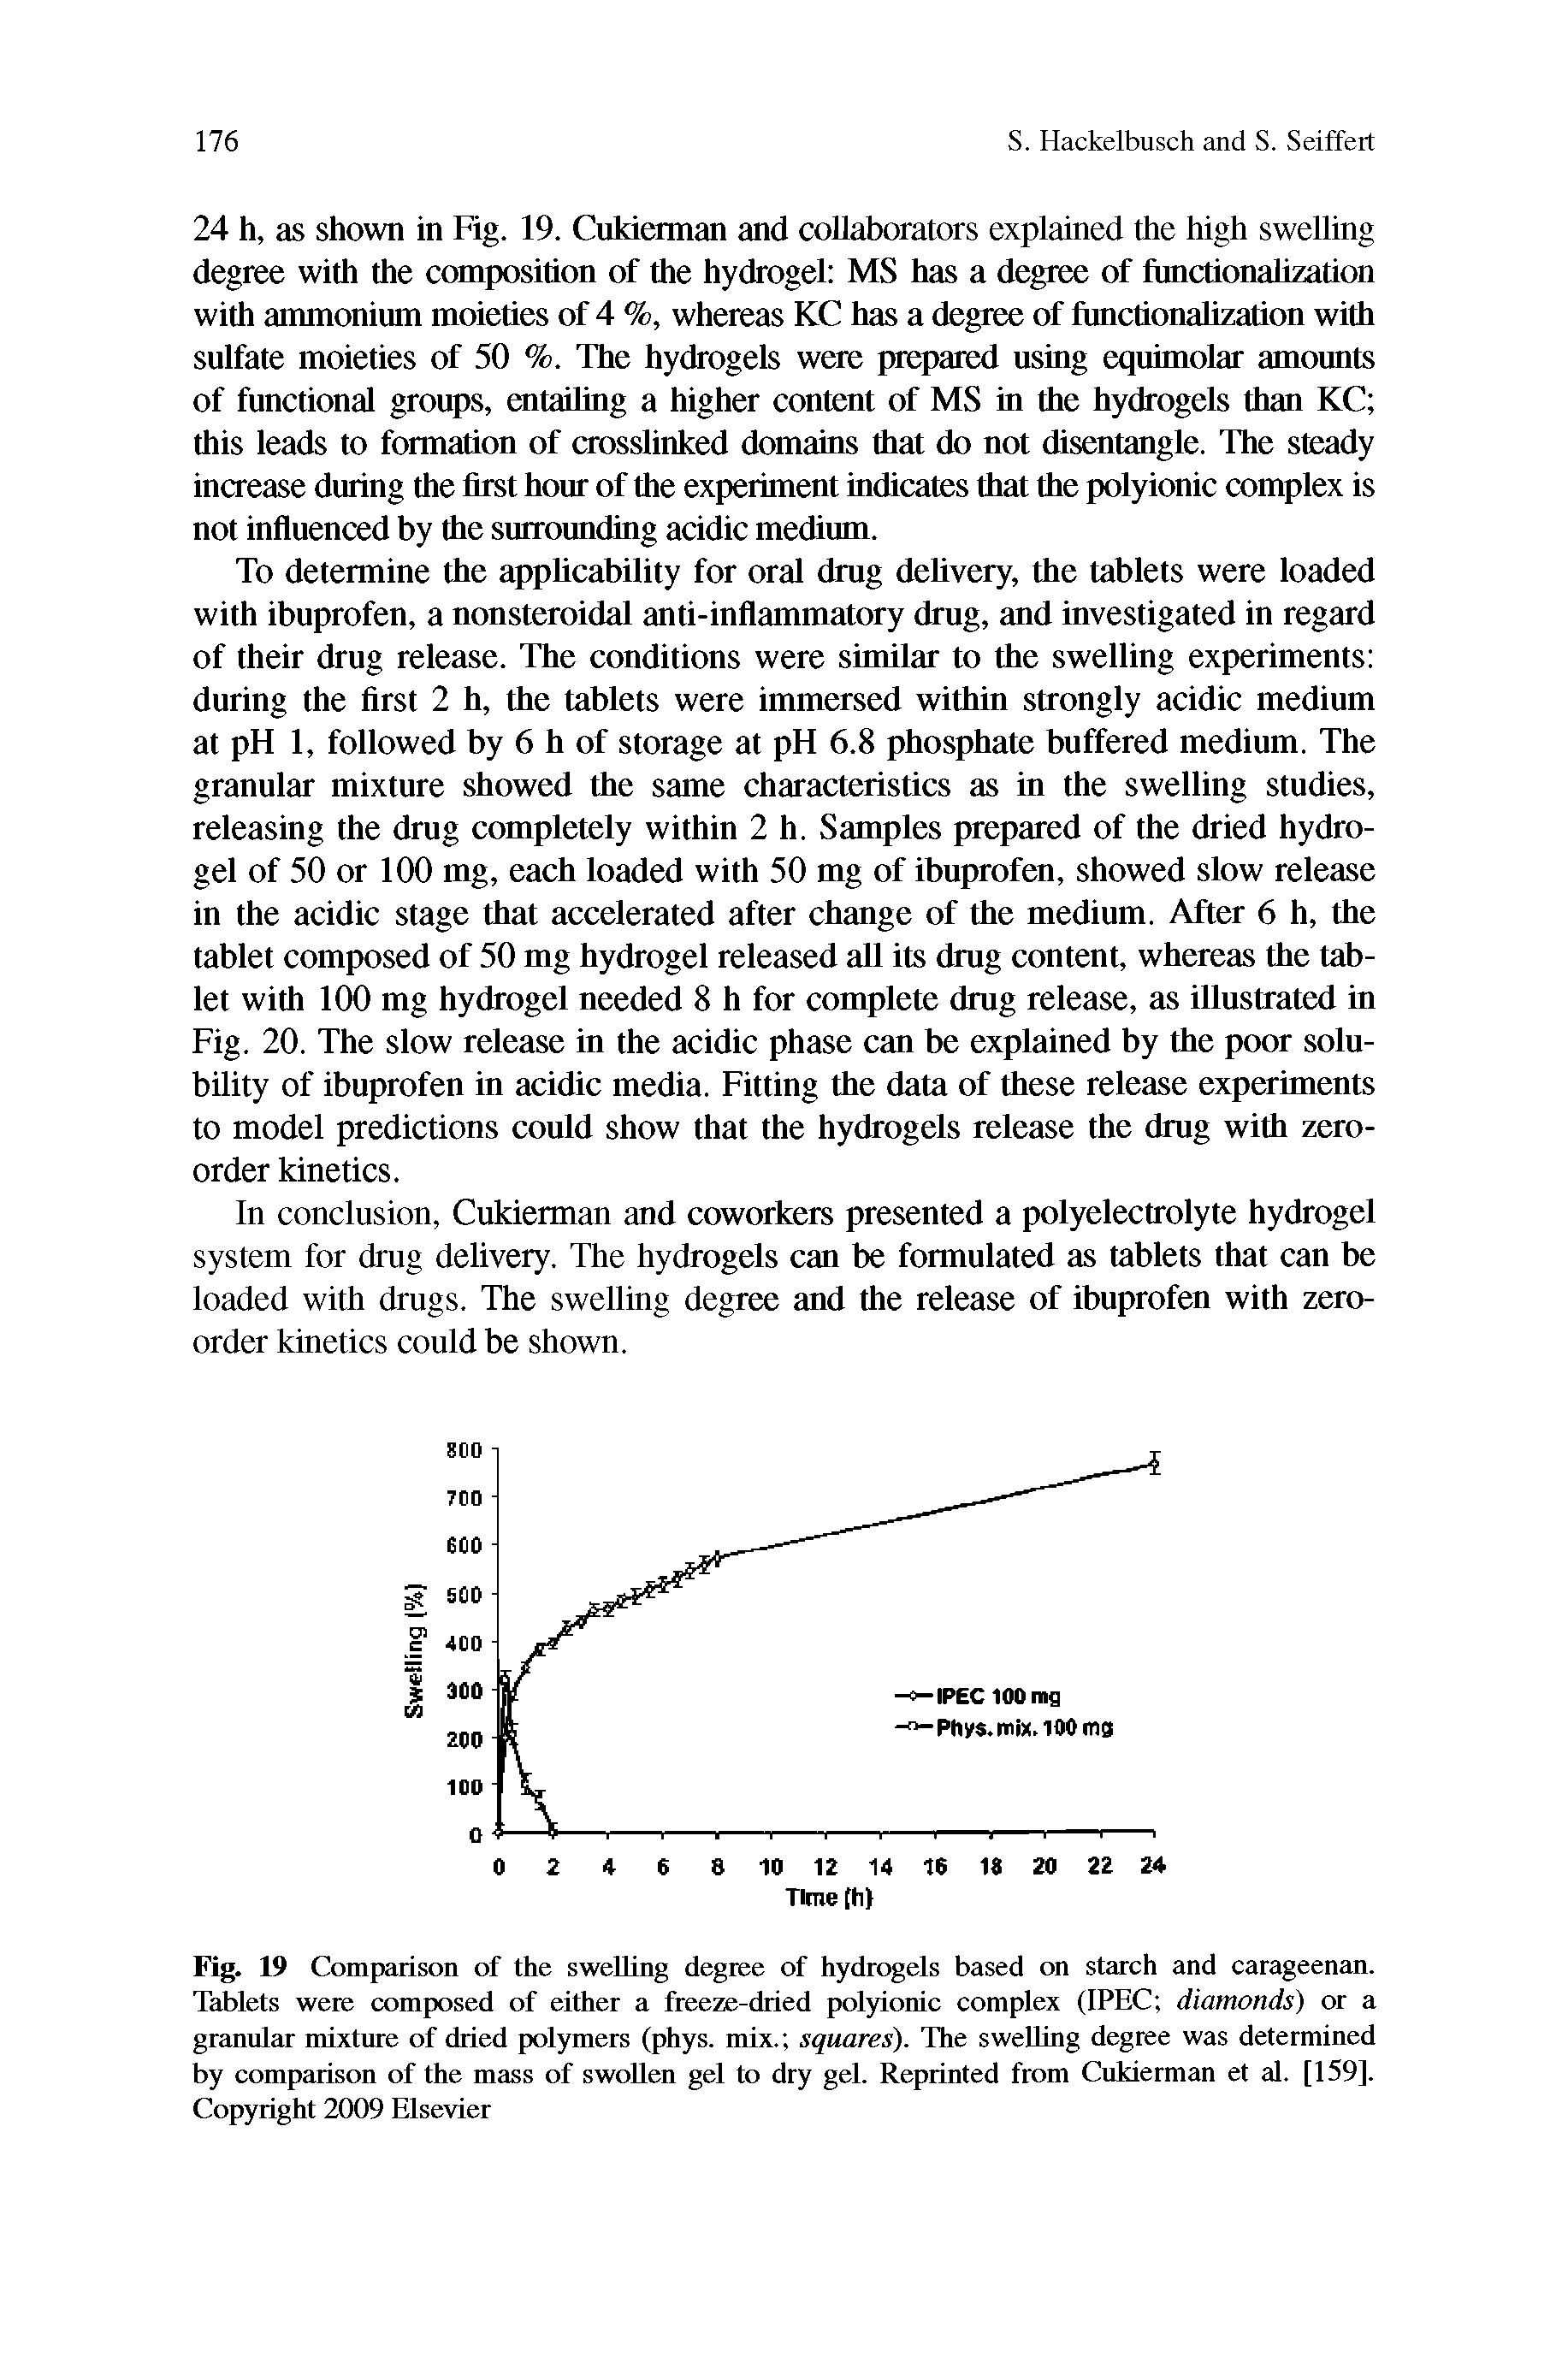 Fig. 19 Comparison of the sweUing degree of hydrogels based on starch and carageenan. Tablets were composed of either a freeze-dried polyionic complex (IPEC diamonds) or a granular mixture of dried polymers (phys. mix. squares). The swelling degree was determined by comparison of the mass of swollen gel to dry gel. Reprinted from Cukiermtm et al. [159]. Copyright 2009 Elsevier...